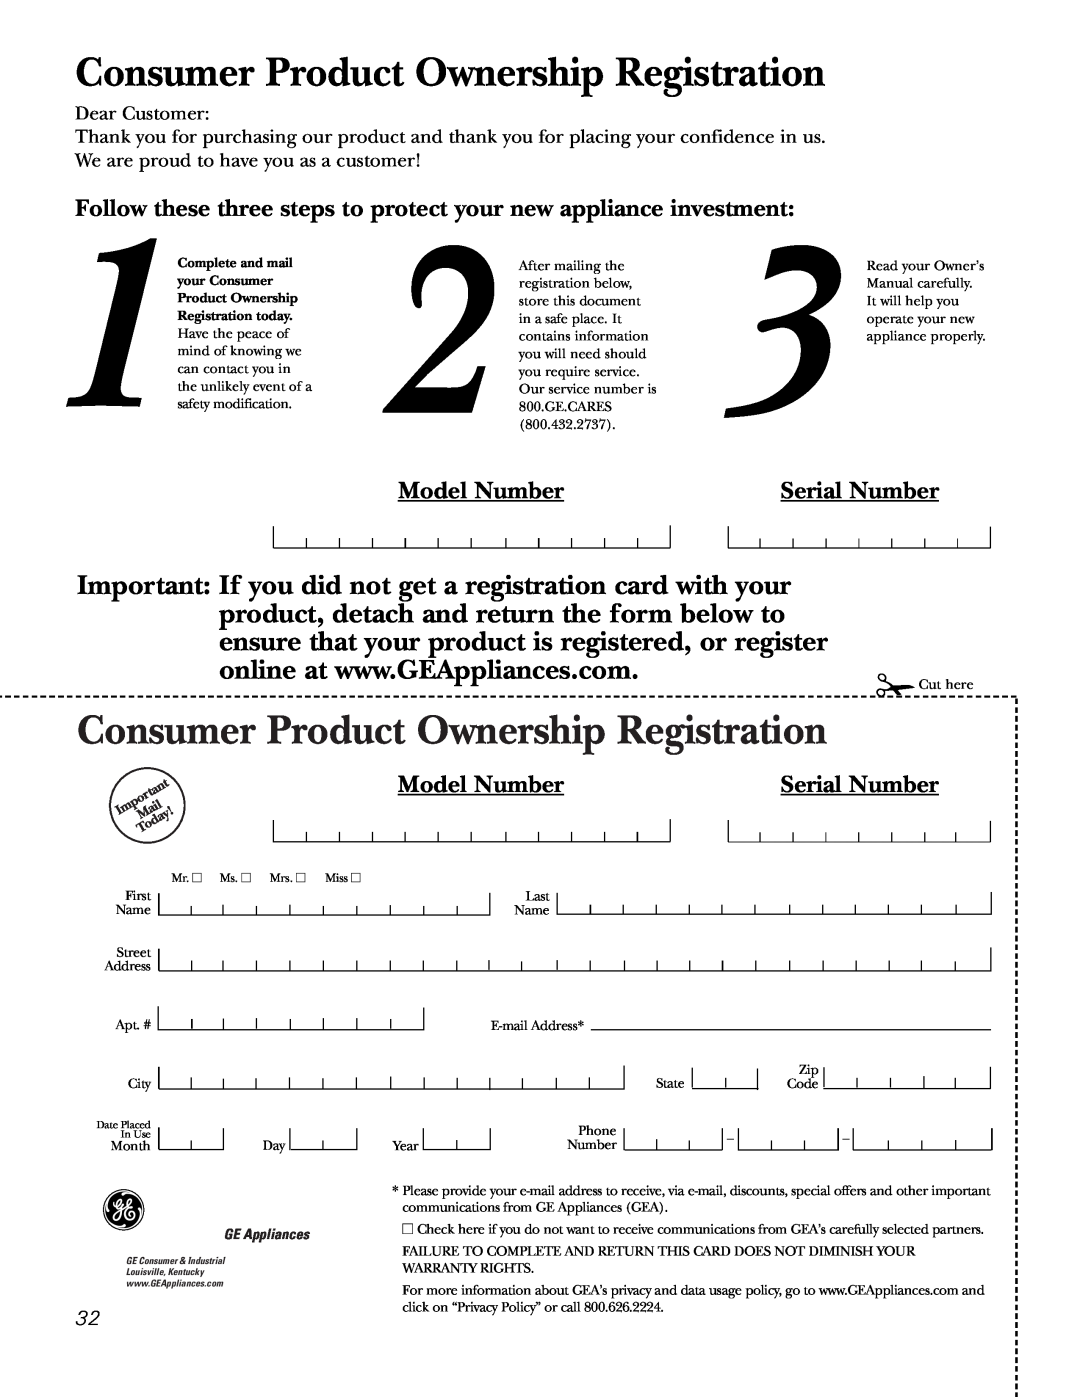 GE JGSP28 Consumer Product Ownership Registration, Model Number, Serial Number, Complete and mail, your Consumer 